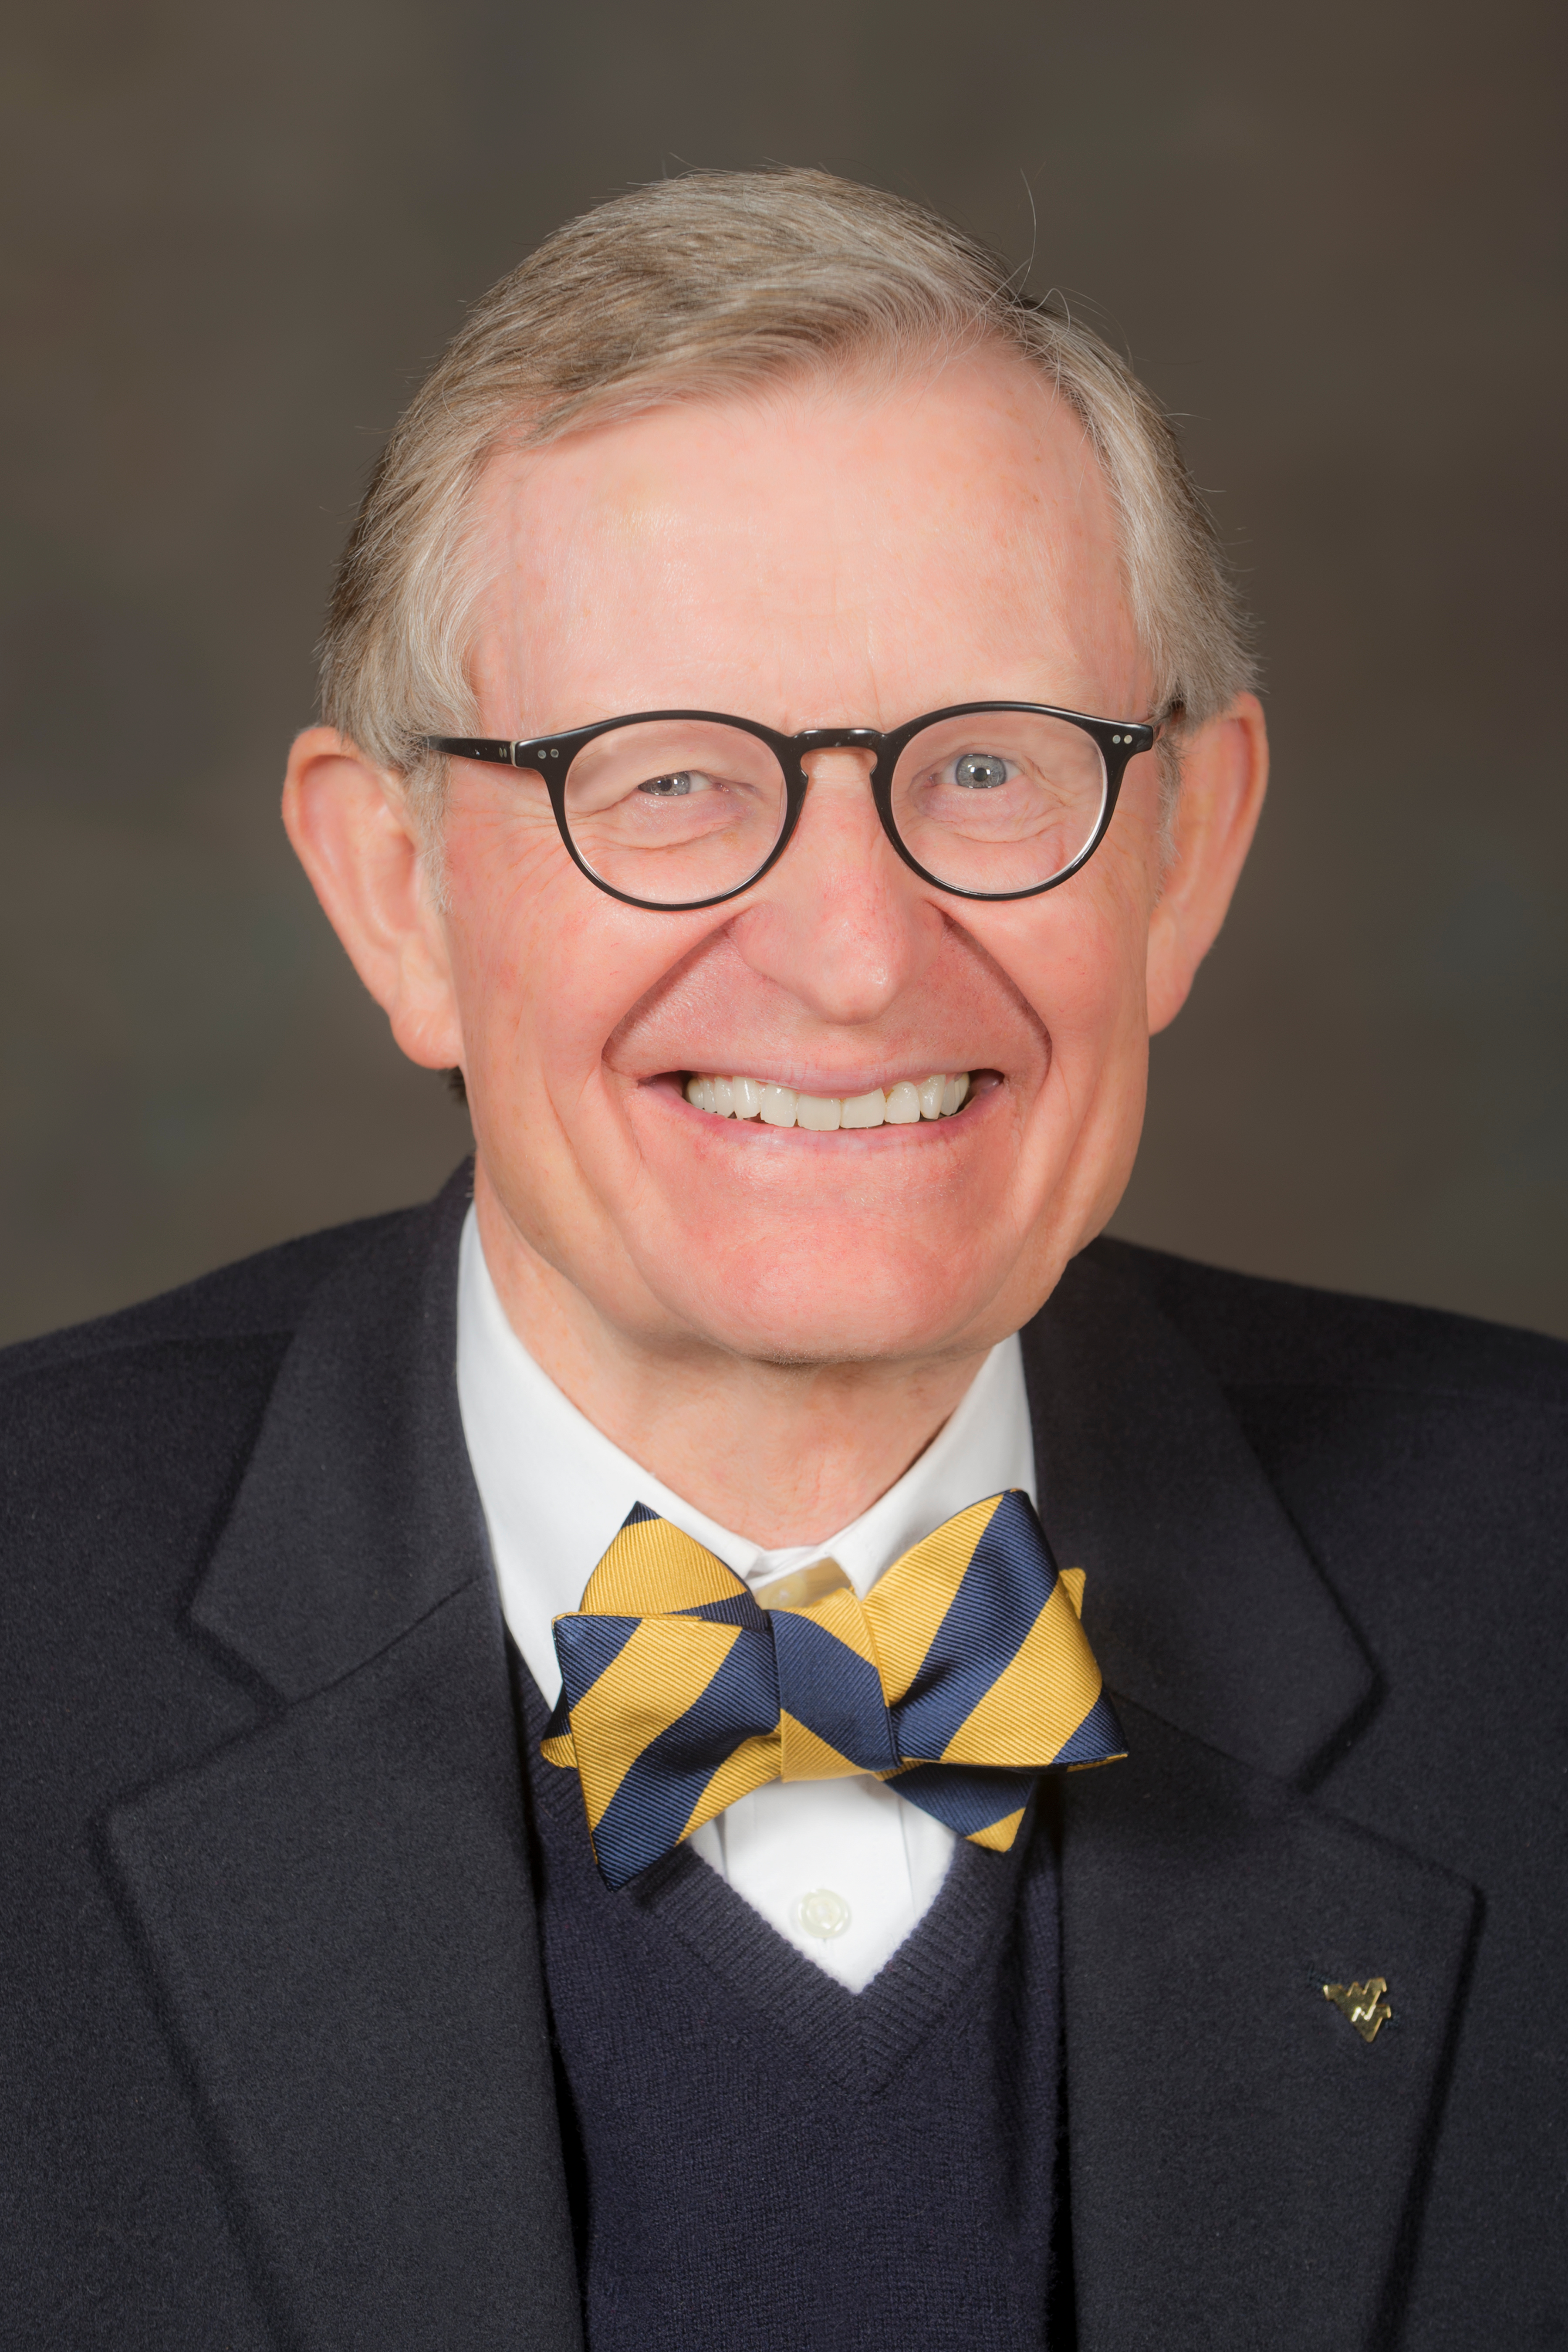 This is a portrait of Gordon Gee. He is wearing a dark jacket and gold and blue bow tie.